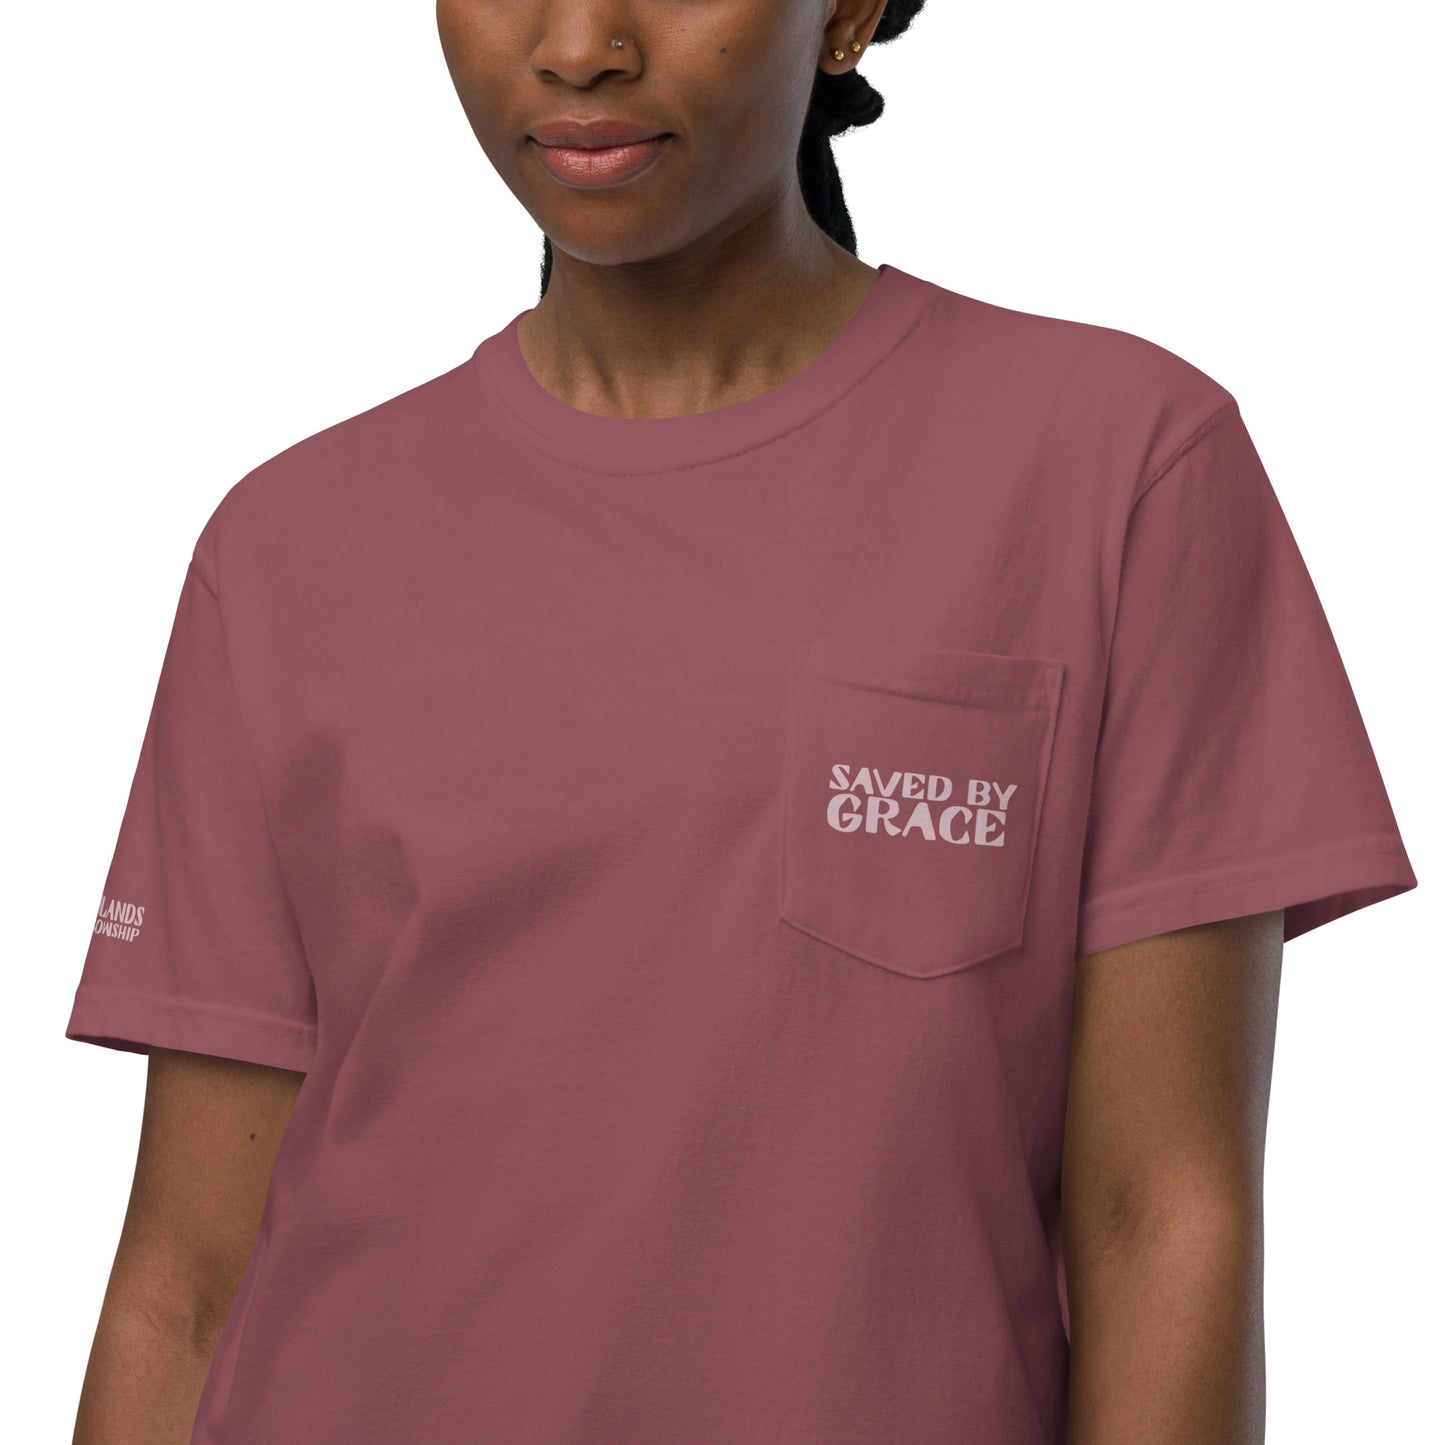 "Saved By Grace" Unisex garment-dyed pocket t-shirt